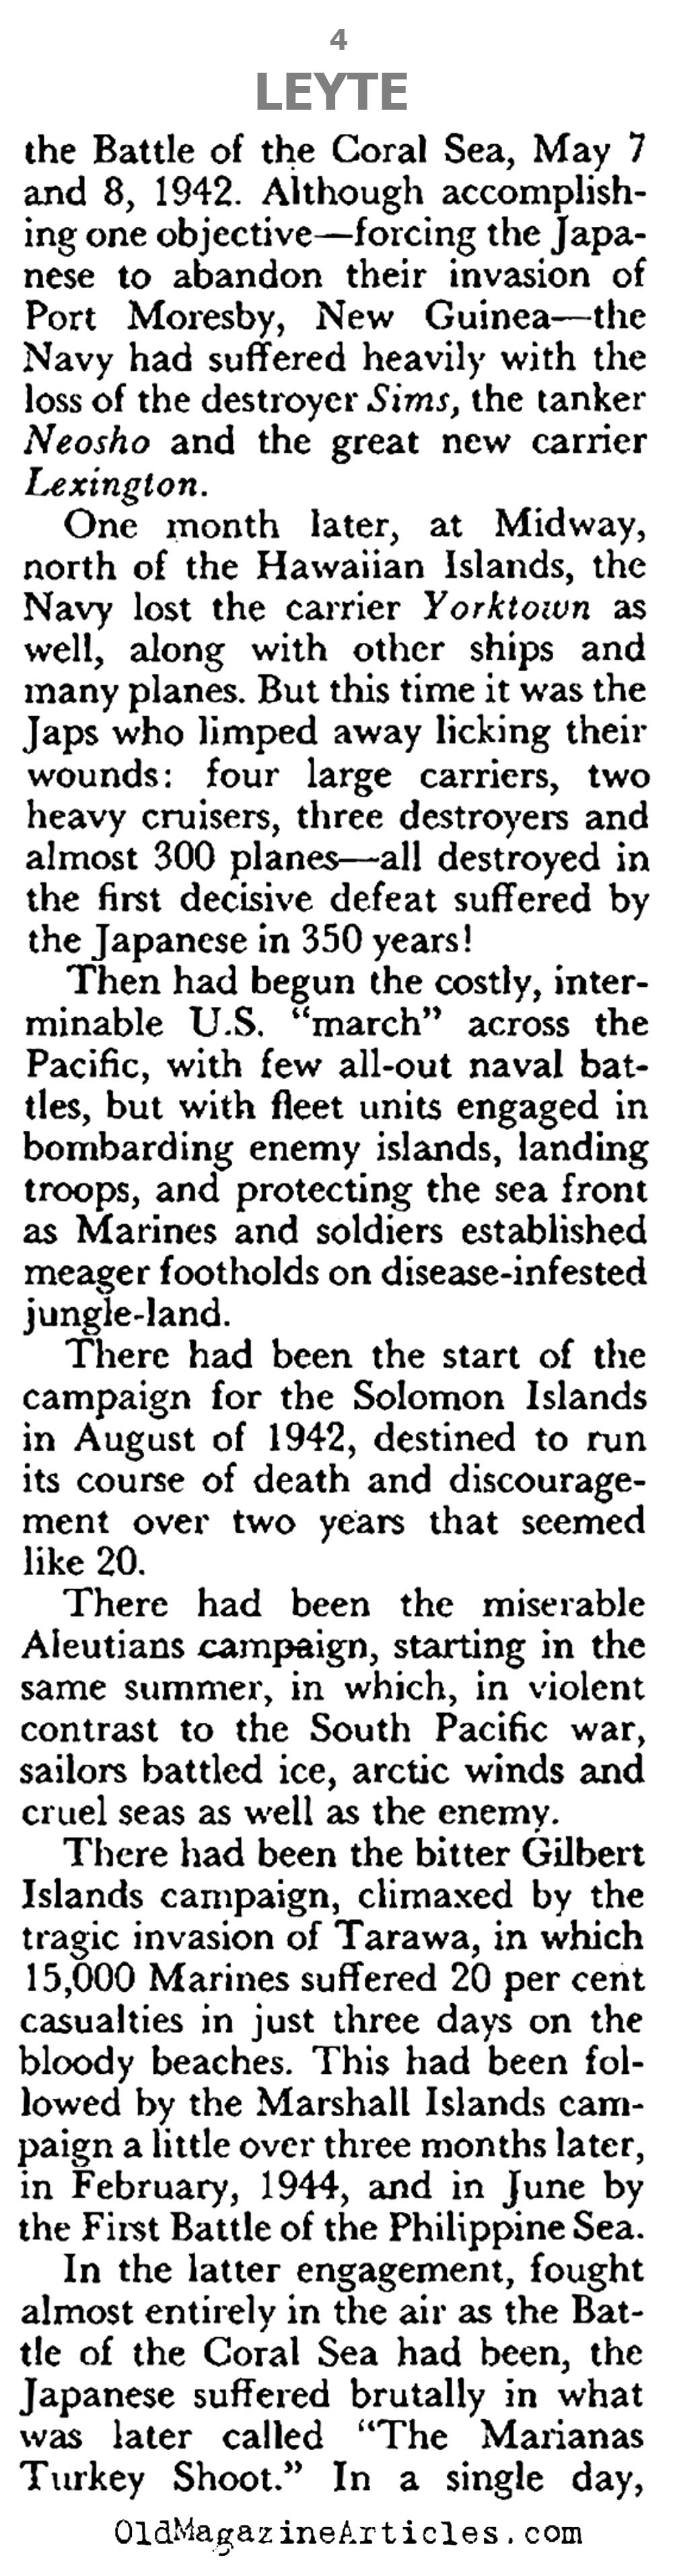 Halsey at Leyte Gulf (Pageant Magazine, 1960)